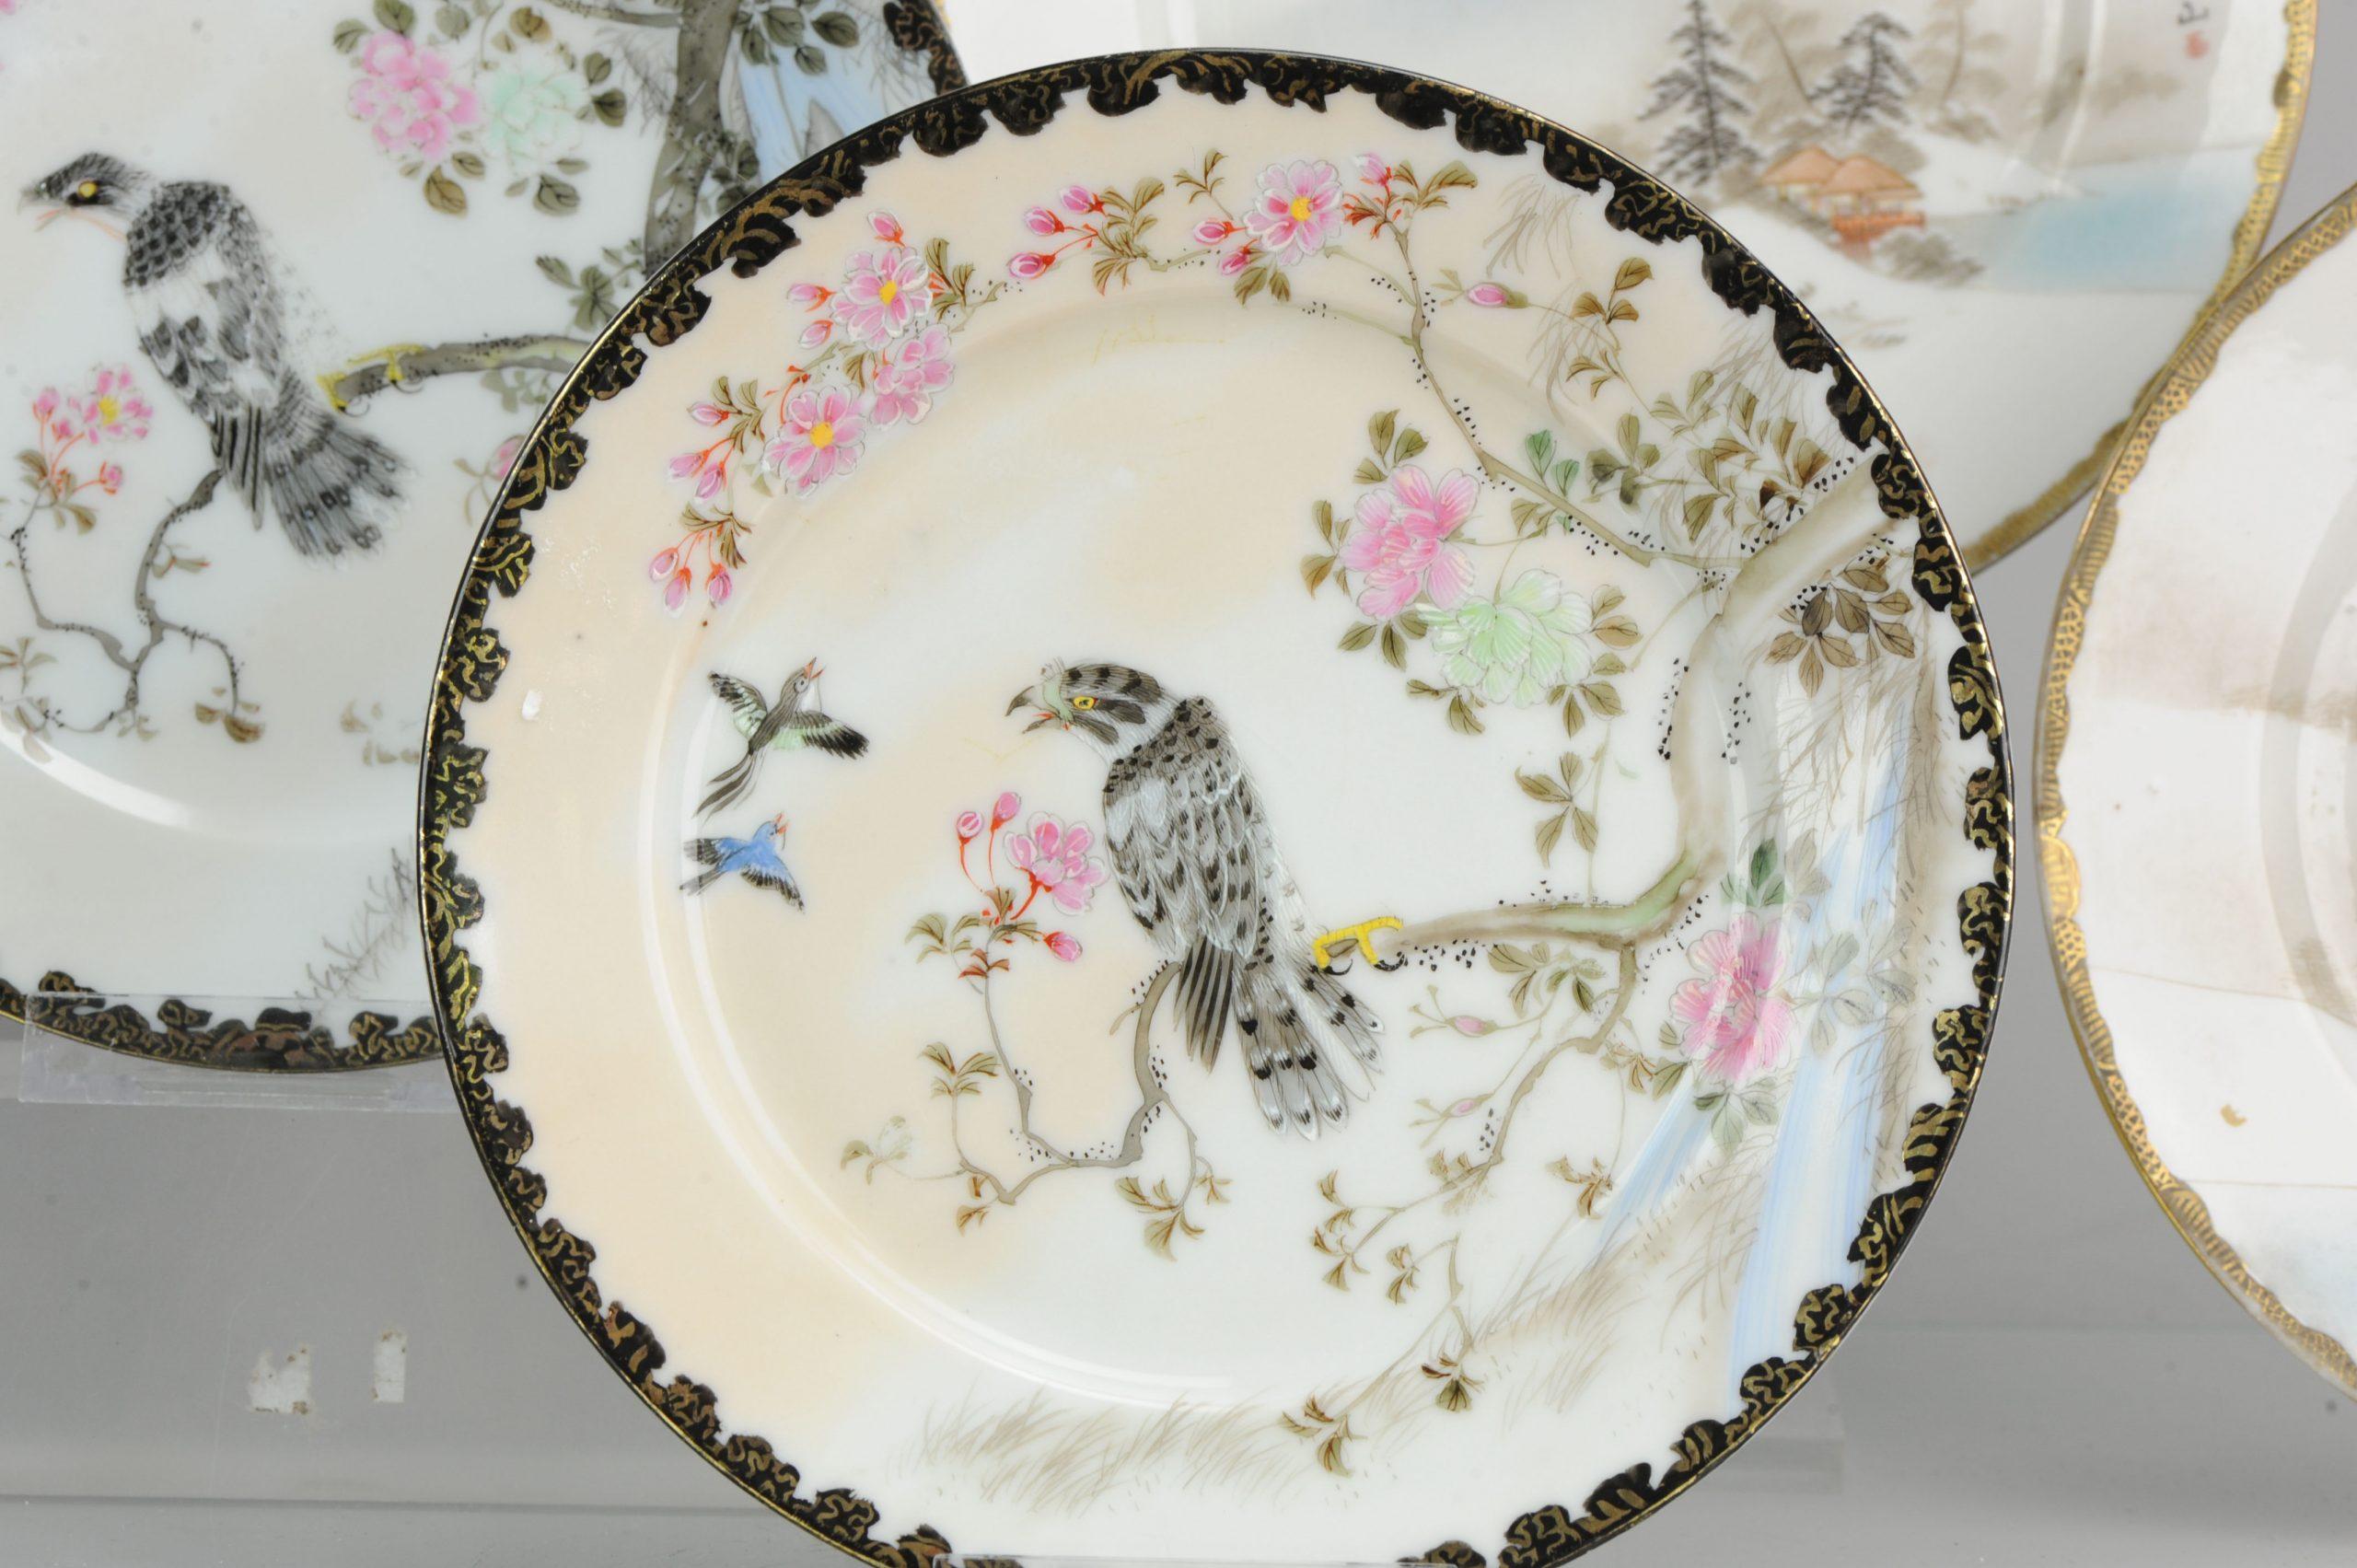 Eat your cakes or sandwiches in style with these lovley Japanes handpainted porcelain plates.

Additional information:
Material: Porcelain & Pottery
Type: Plates
Region of Origin: Japan
Period: 20th century
Condition: Overall Condition 4x Perfect.